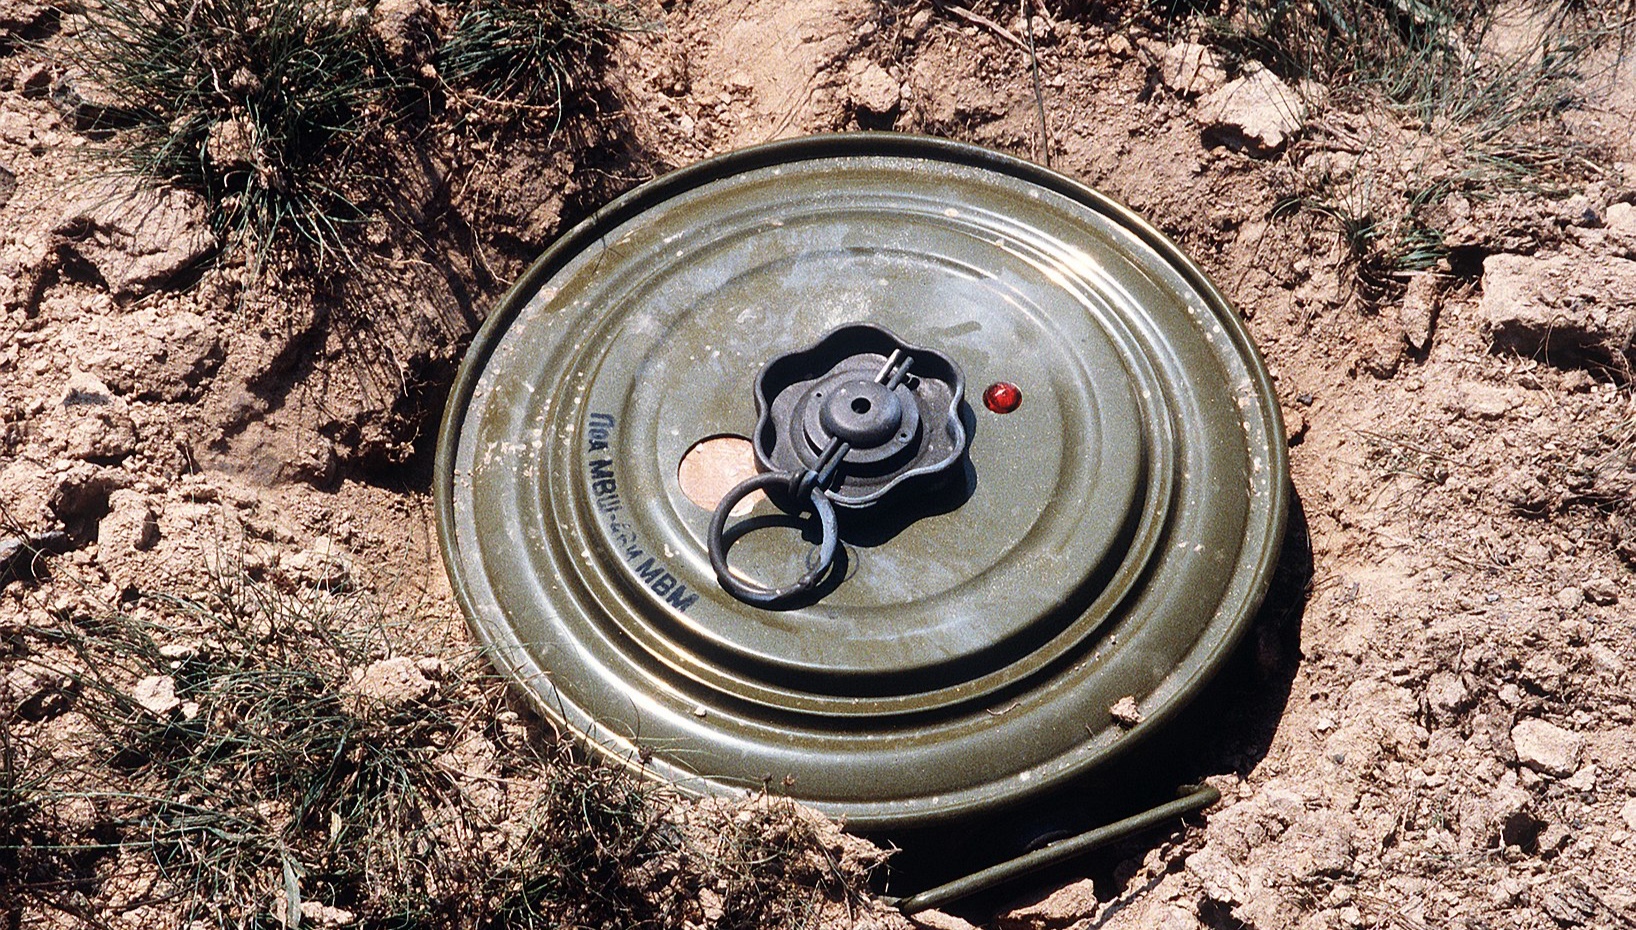 Russians use mines manufactured in the 1950s